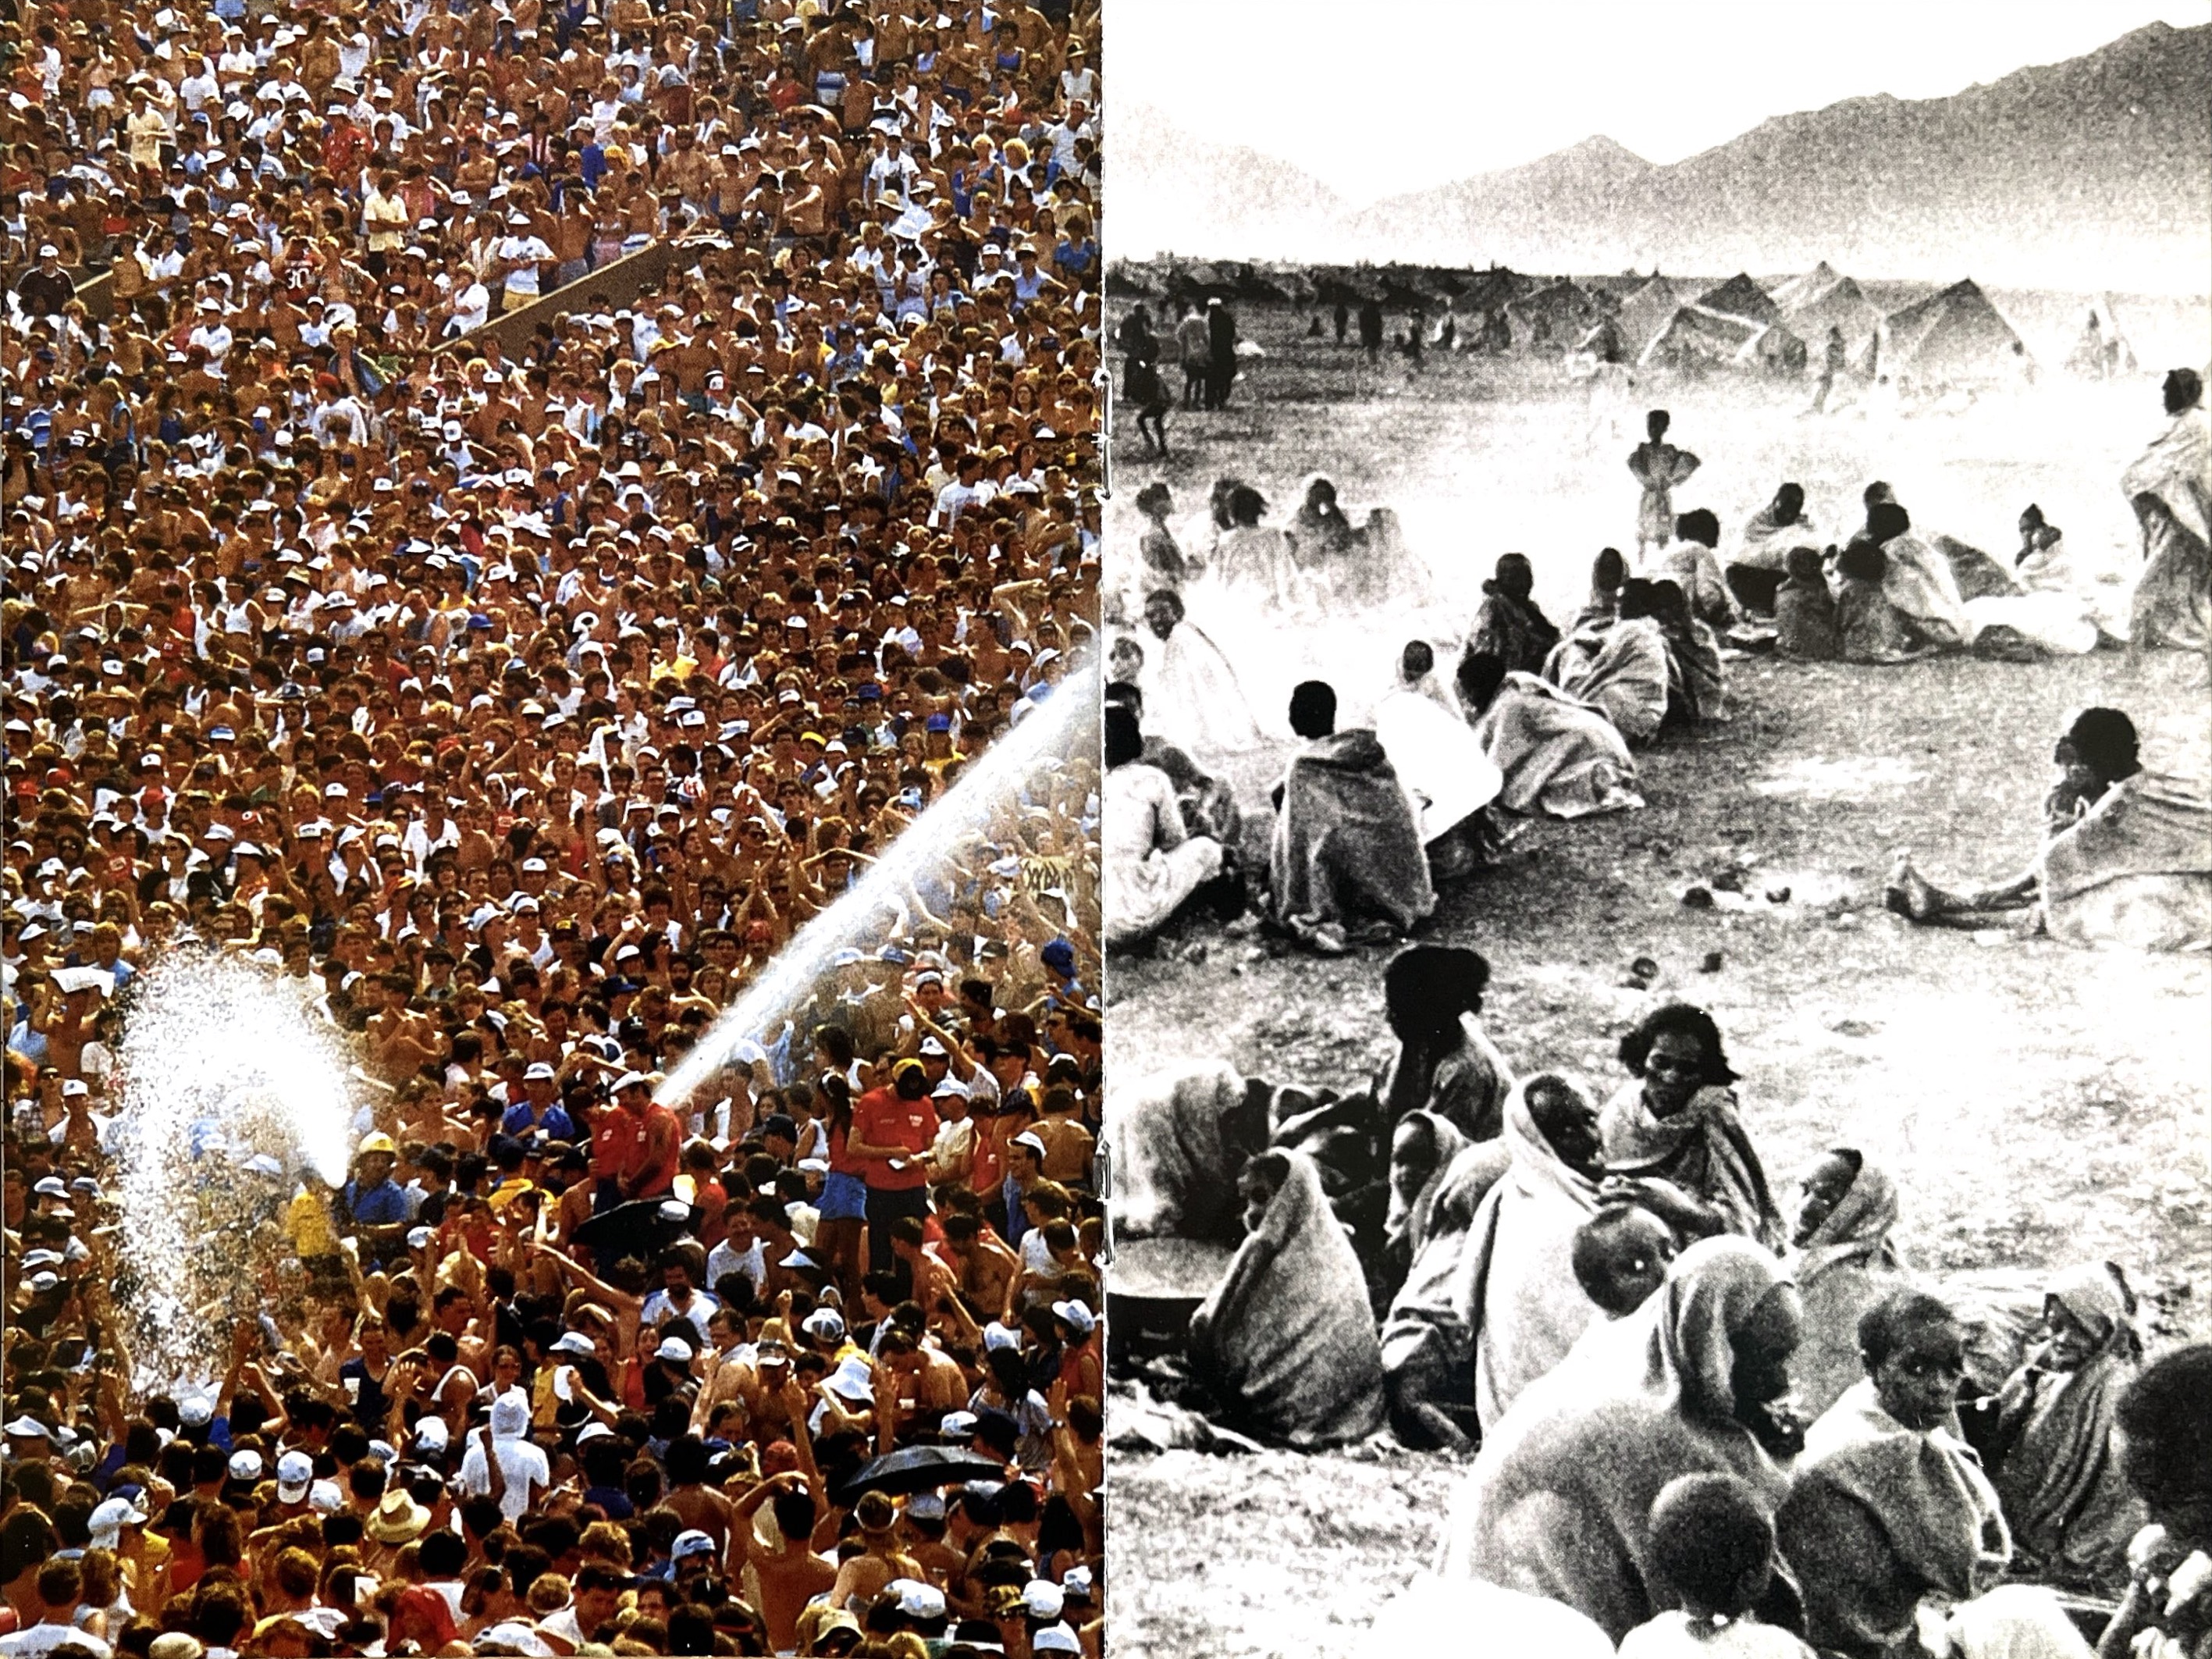 Double-page spread from the Live Aid DVD booklet. On the left, a colour photograph shows a couple of large water jets being sprayed across the huge crowd in Philadelphia to keep them cool in the heat. On the right, a black and white photo shows frail African children and adults wrapped in blankets outdoors, stretching far into the distance.